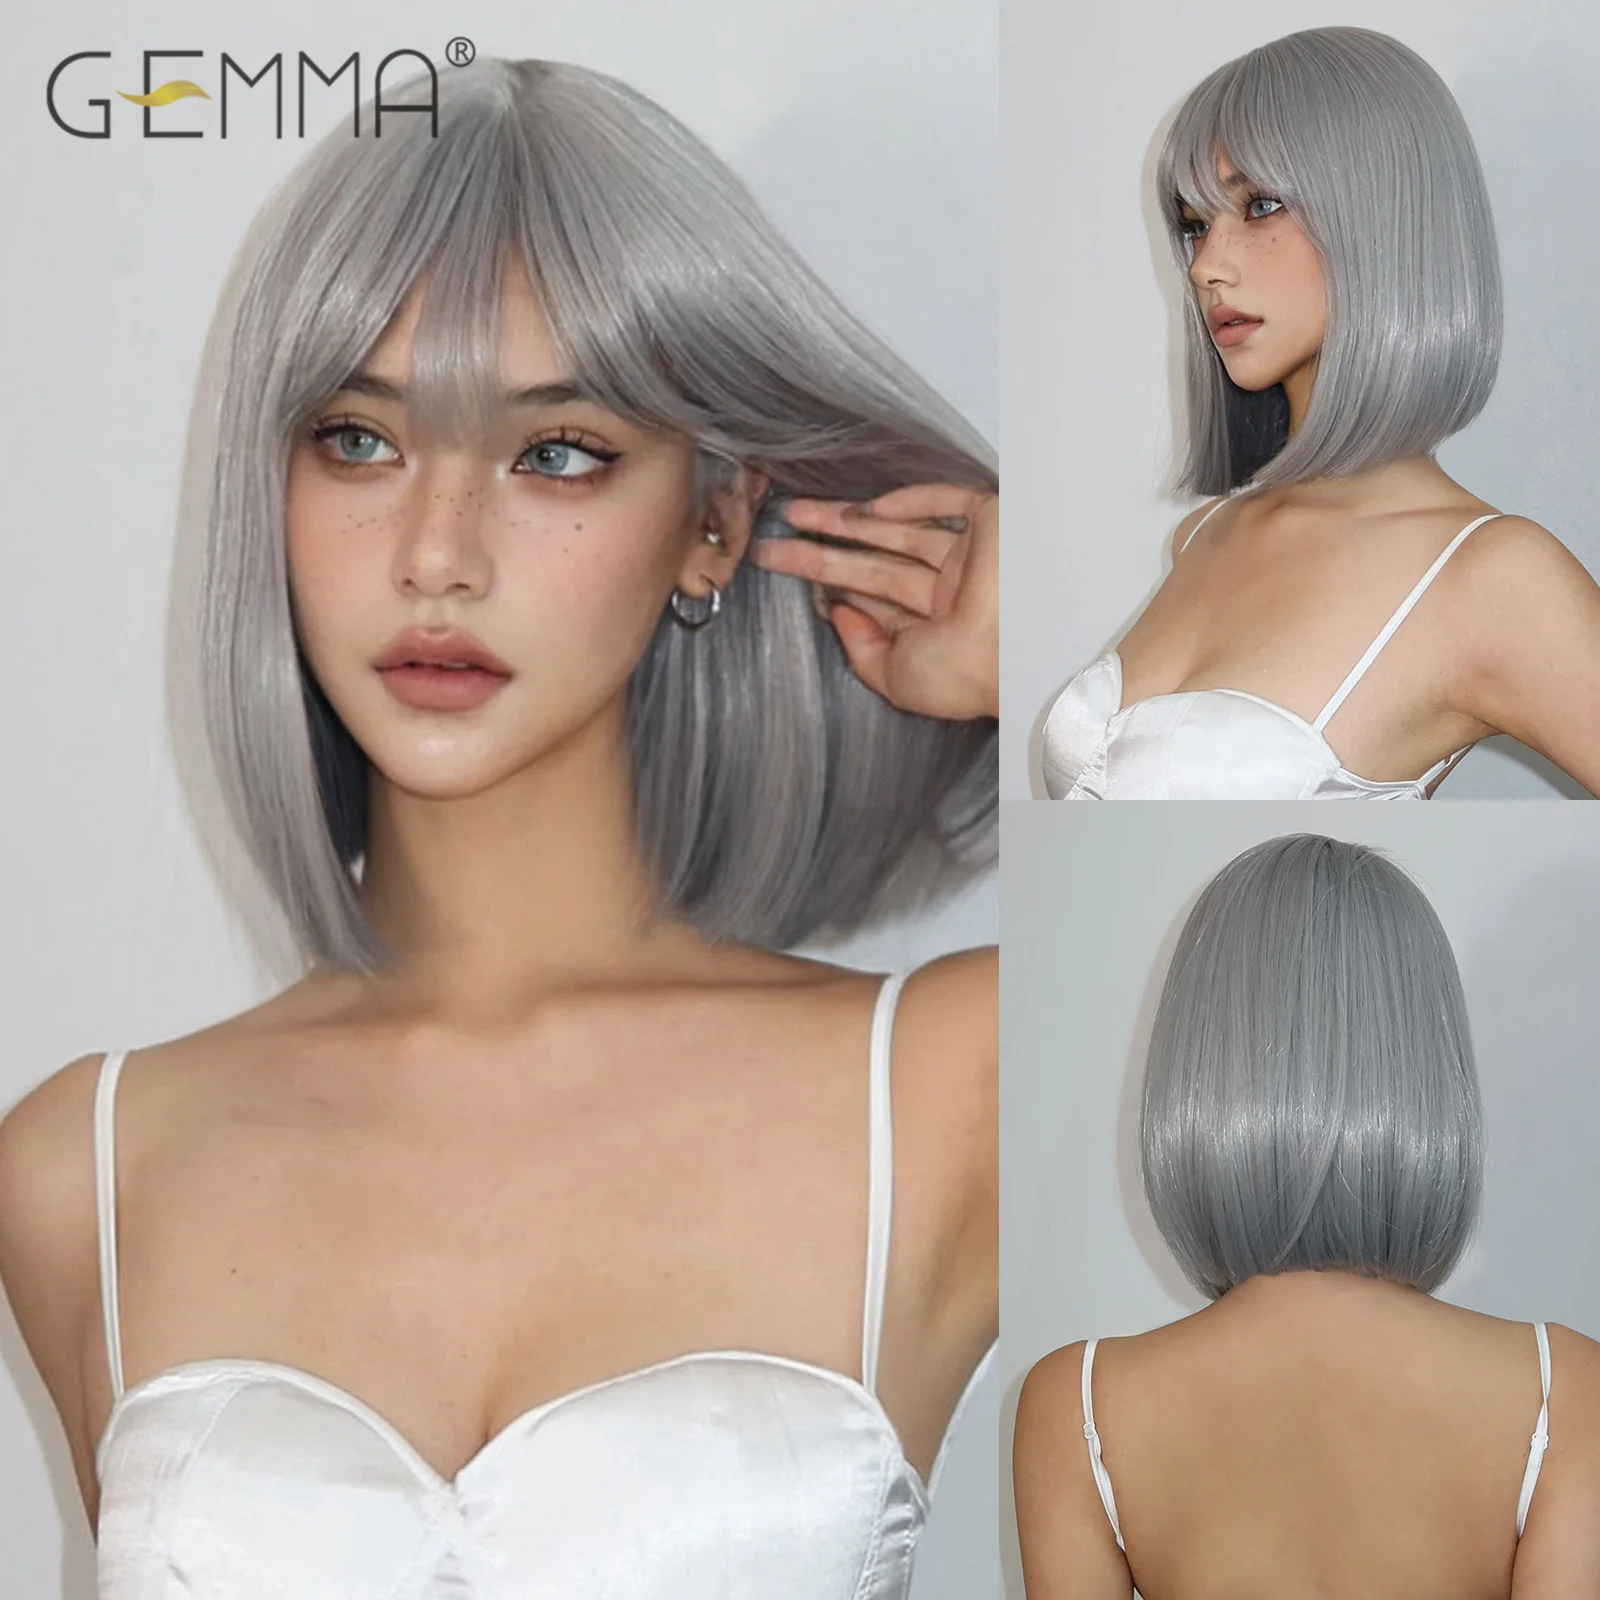 Silver Gray Short Straight Wig Synthetic Bob Wigs with Bangs for White Women Cosplay Daily Use Wig Natural Hair Heat Resistant cosplay makima wigs orange red ombre long straight wigs for women synthetic wigs with bangs heat resistant fiber wigshair